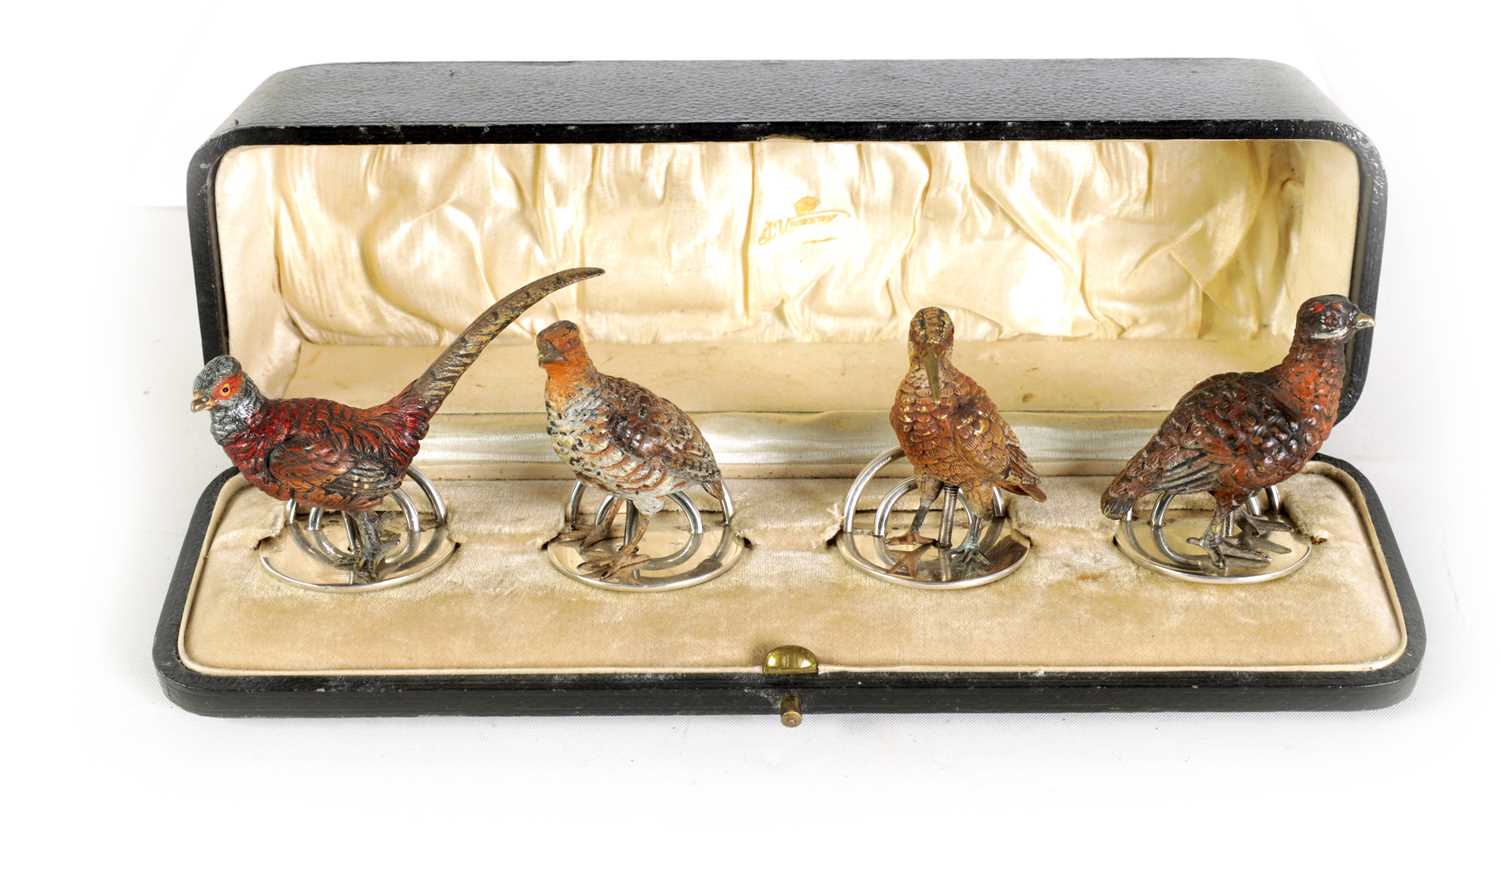 Lot 453 - A CASED SET OF LATE 19TH CENTURY FOUR COLD-PAINTED BRONZE AND SILVER GAME BIRDS MENU HOLDERS